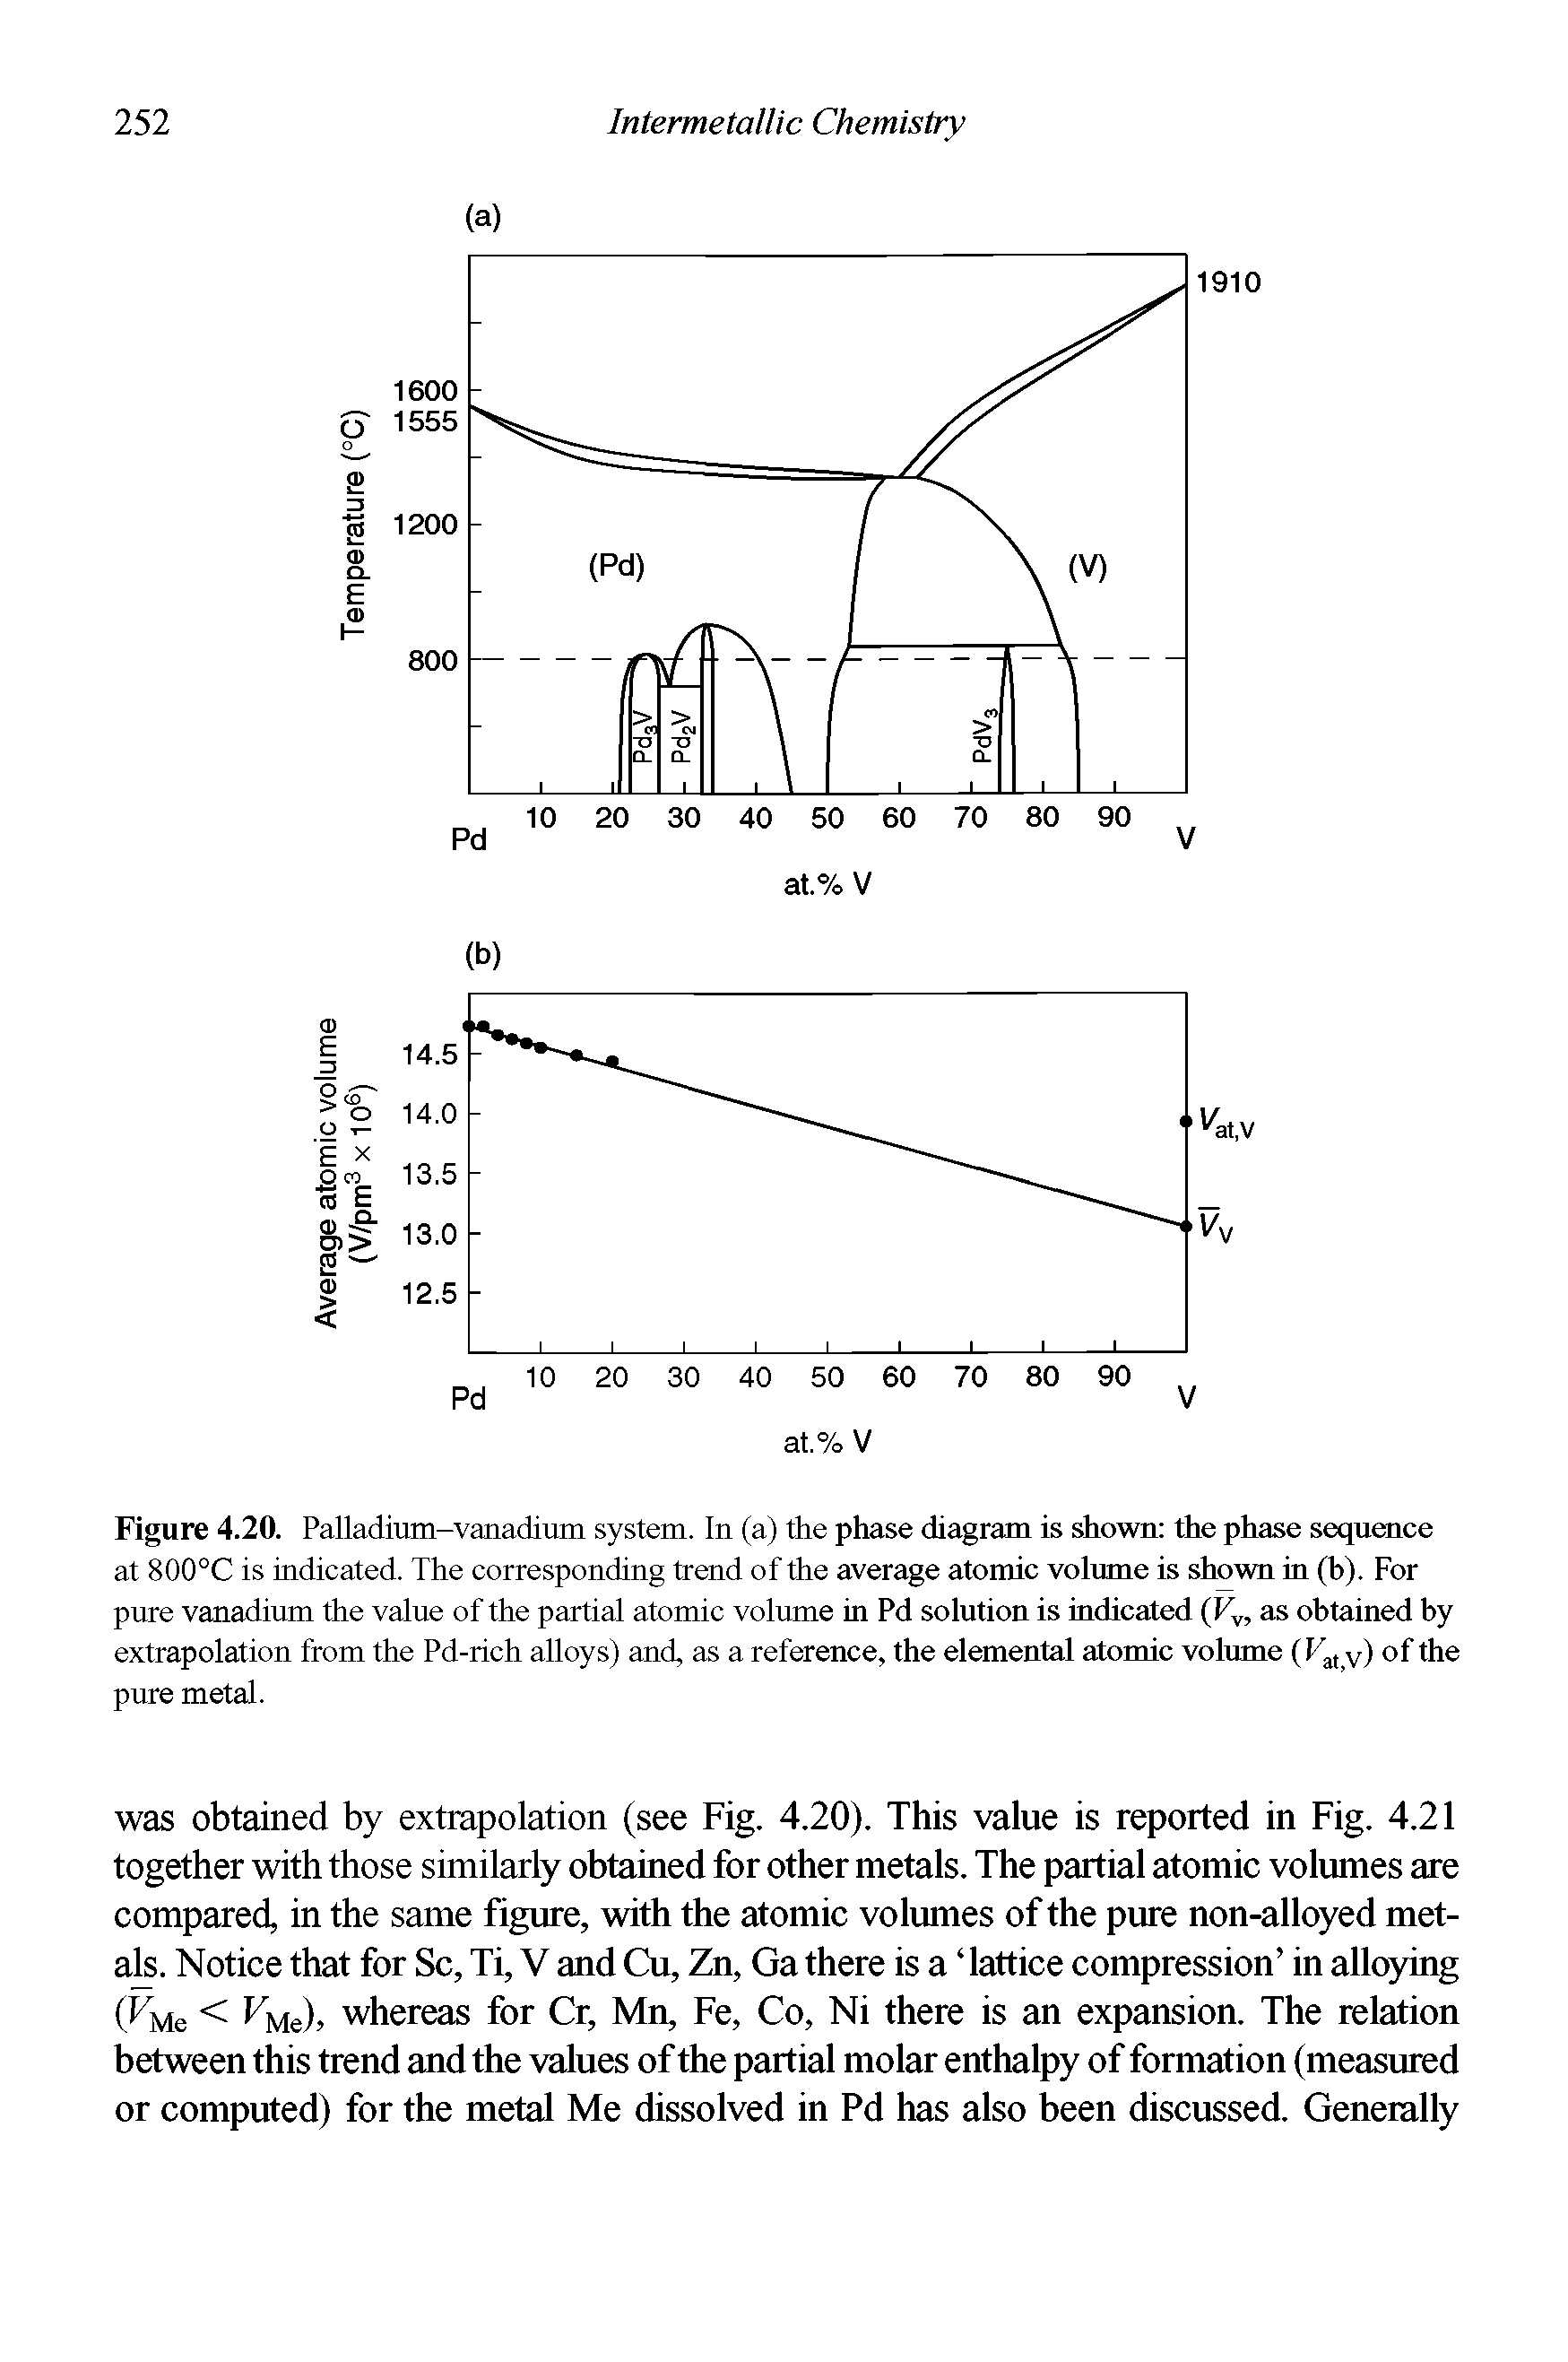 Figure 4.20. Palladium-vanadium system. In (a) the phase diagram is shown the phase sequence at 800°C is indicated. The corresponding trend of the average atomic volume is shown in (b). For pure vanadium the value of the partial atomic volume in Pd solution is indicated (Vv, as obtained by extrapolation from the Pd-rich alloys) and, as a reference, the elemental atomic volume (FatV) of the pure metal.